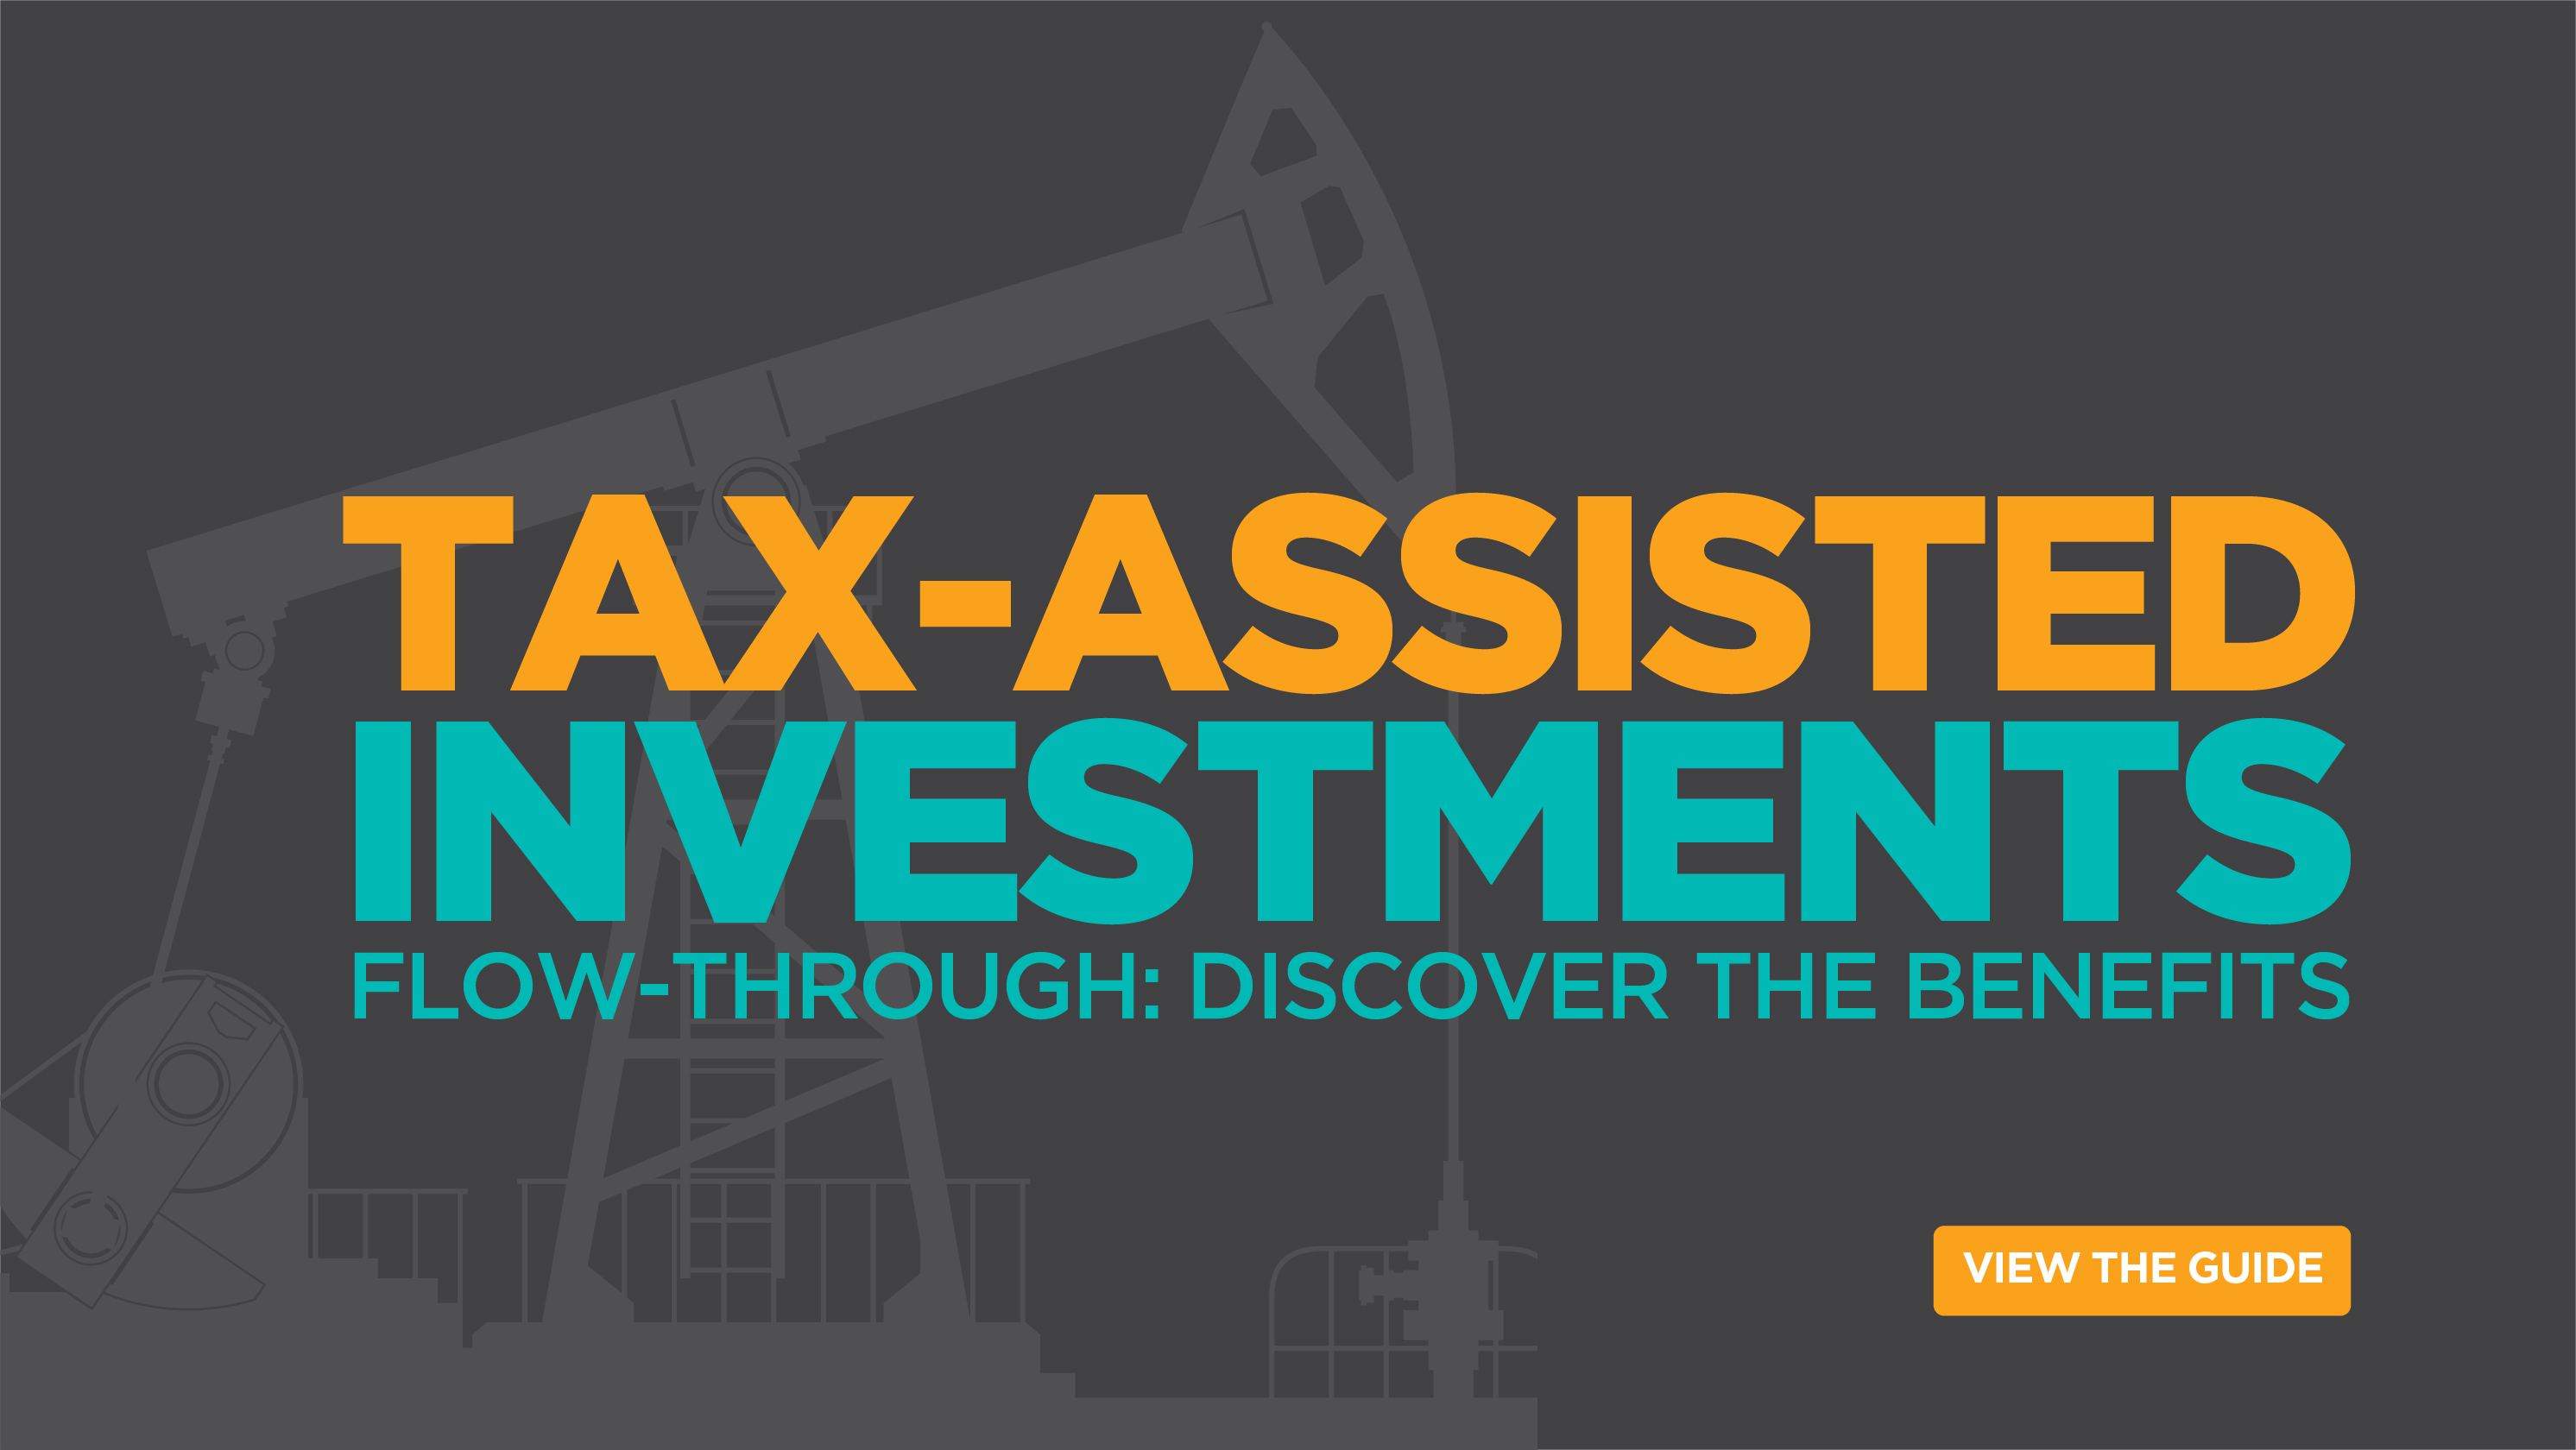 Tax-Assisted Investments